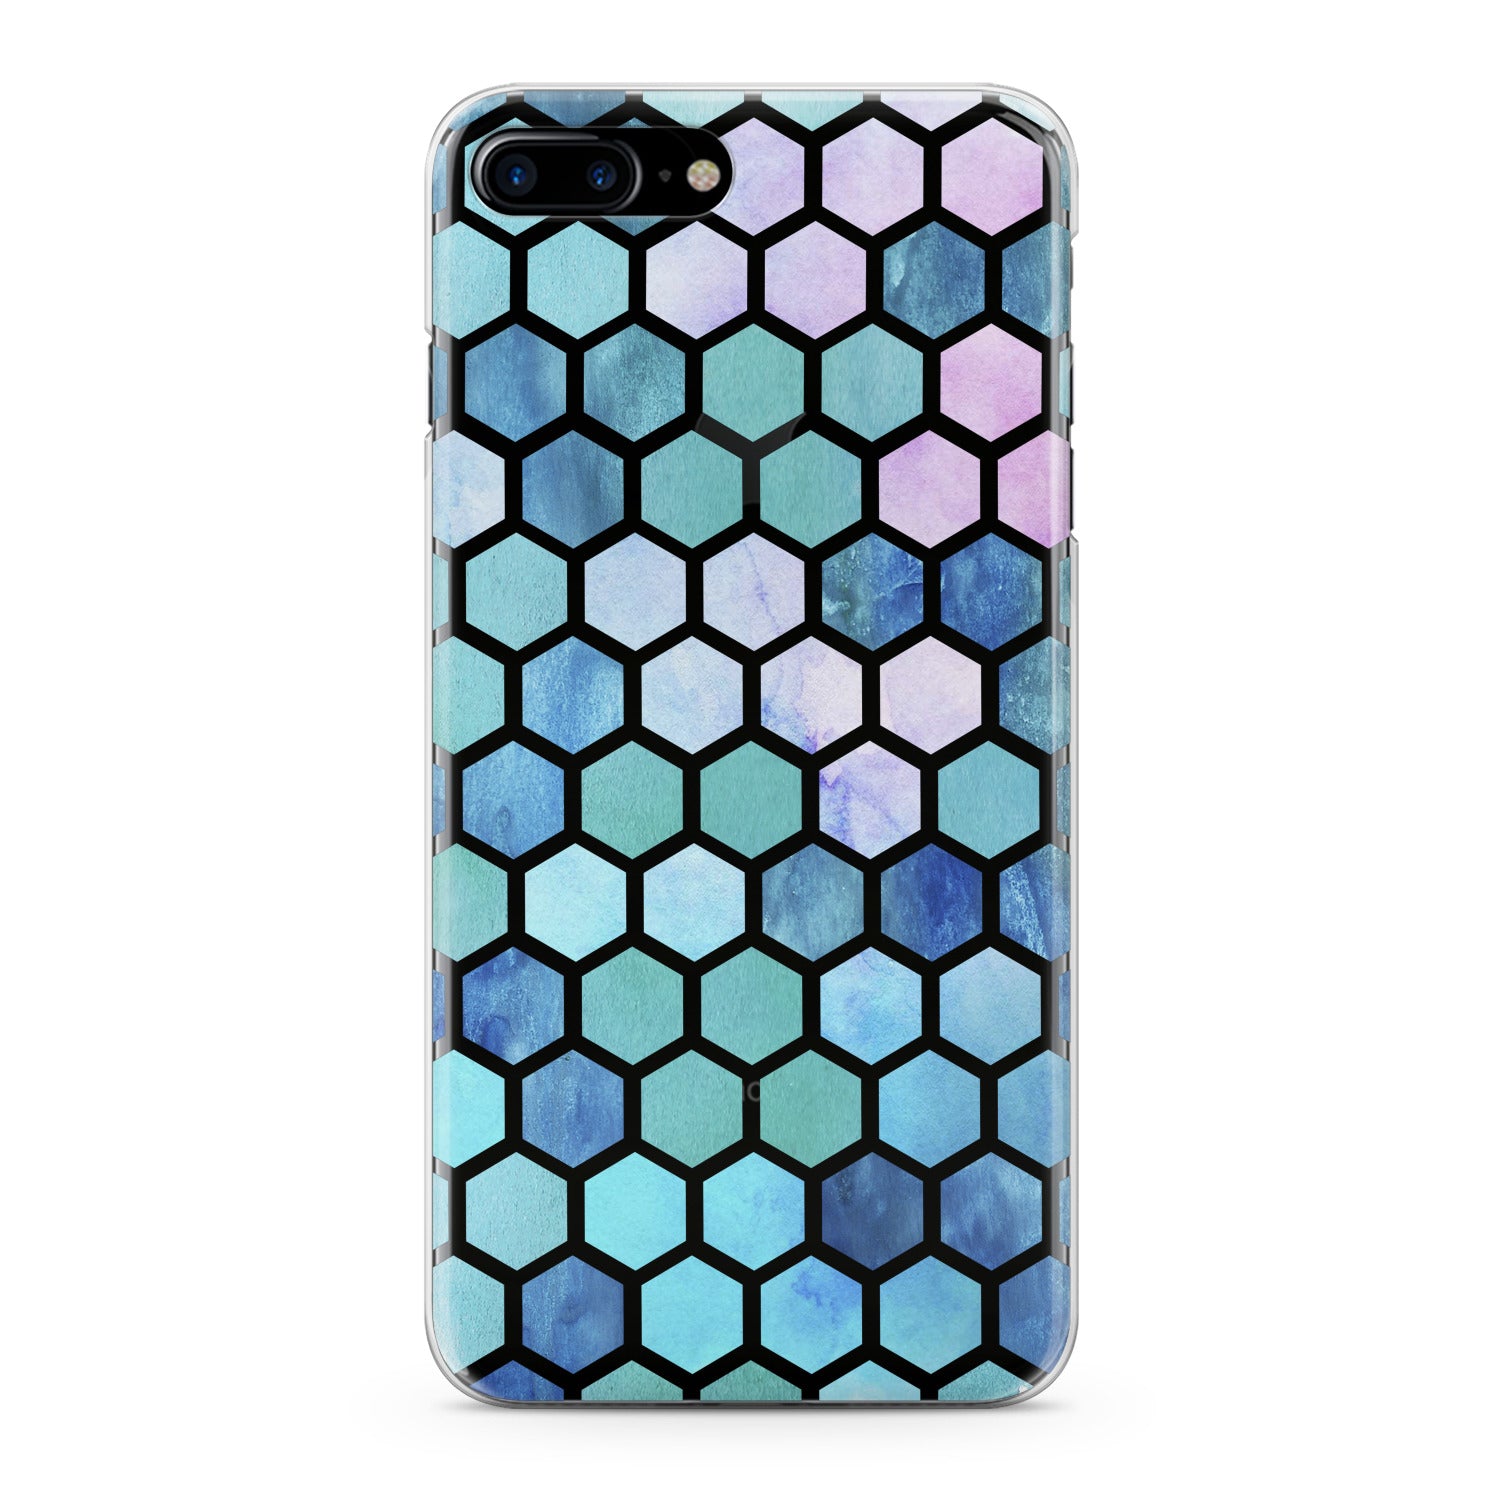 Lex Altern Blue Honeycomb Phone Case for your iPhone & Android phone.